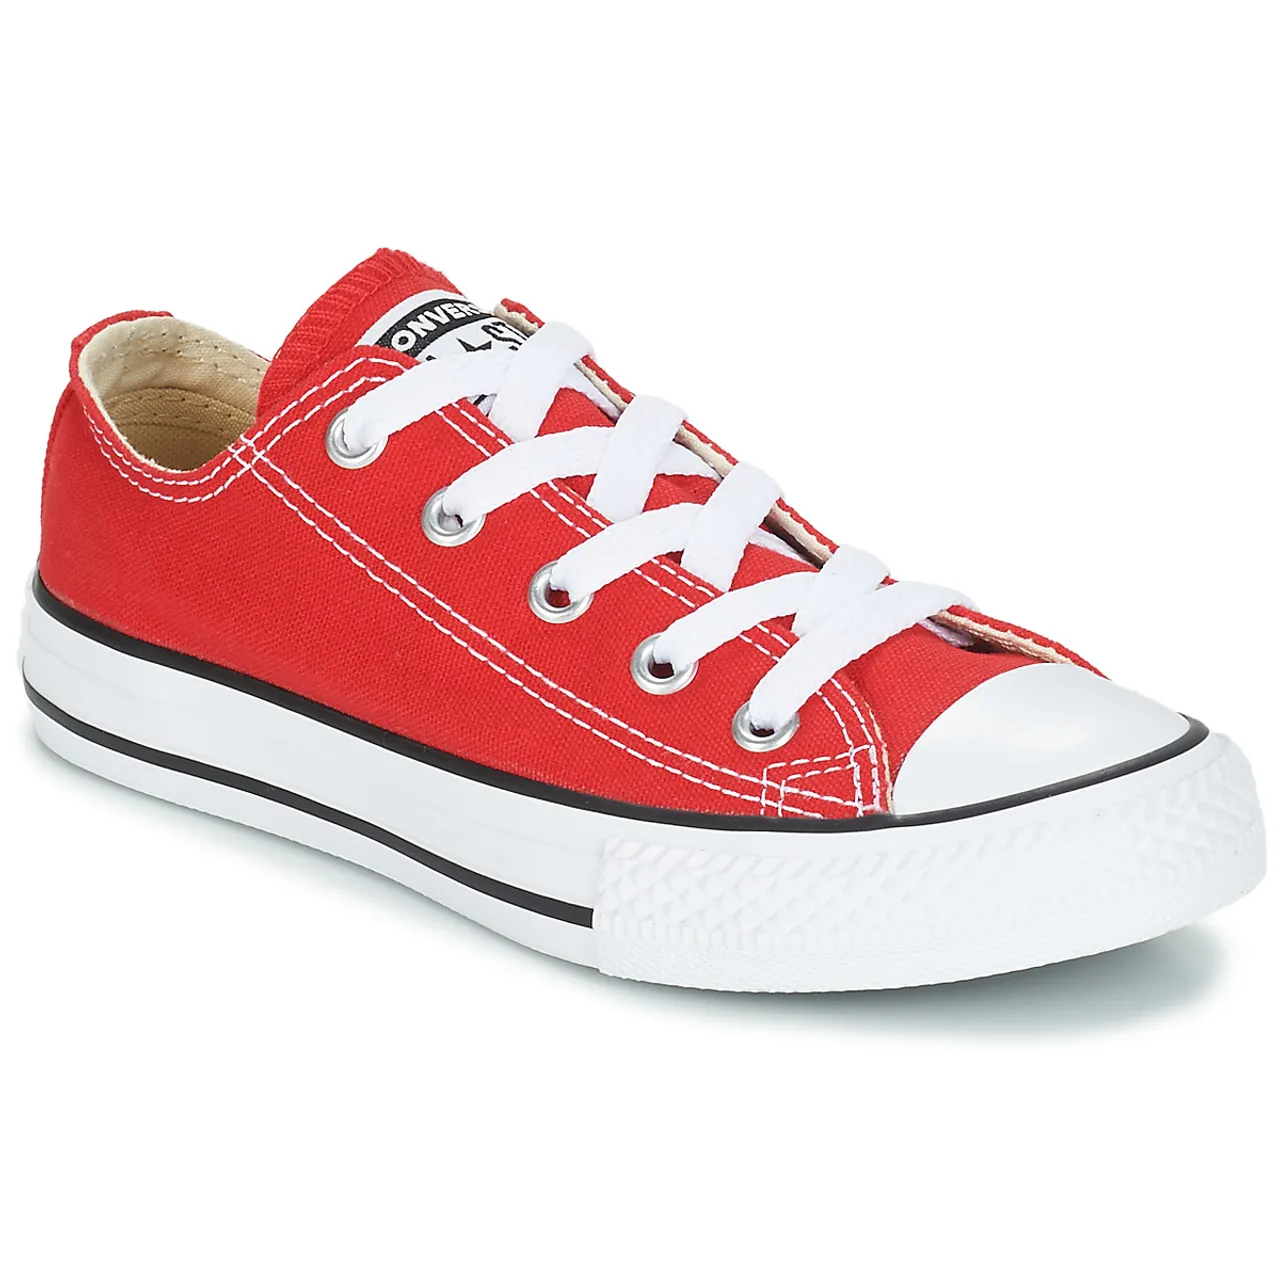 Converse  ALL STAR OX  boys's Children's Shoes (High-top Trainers) in Red